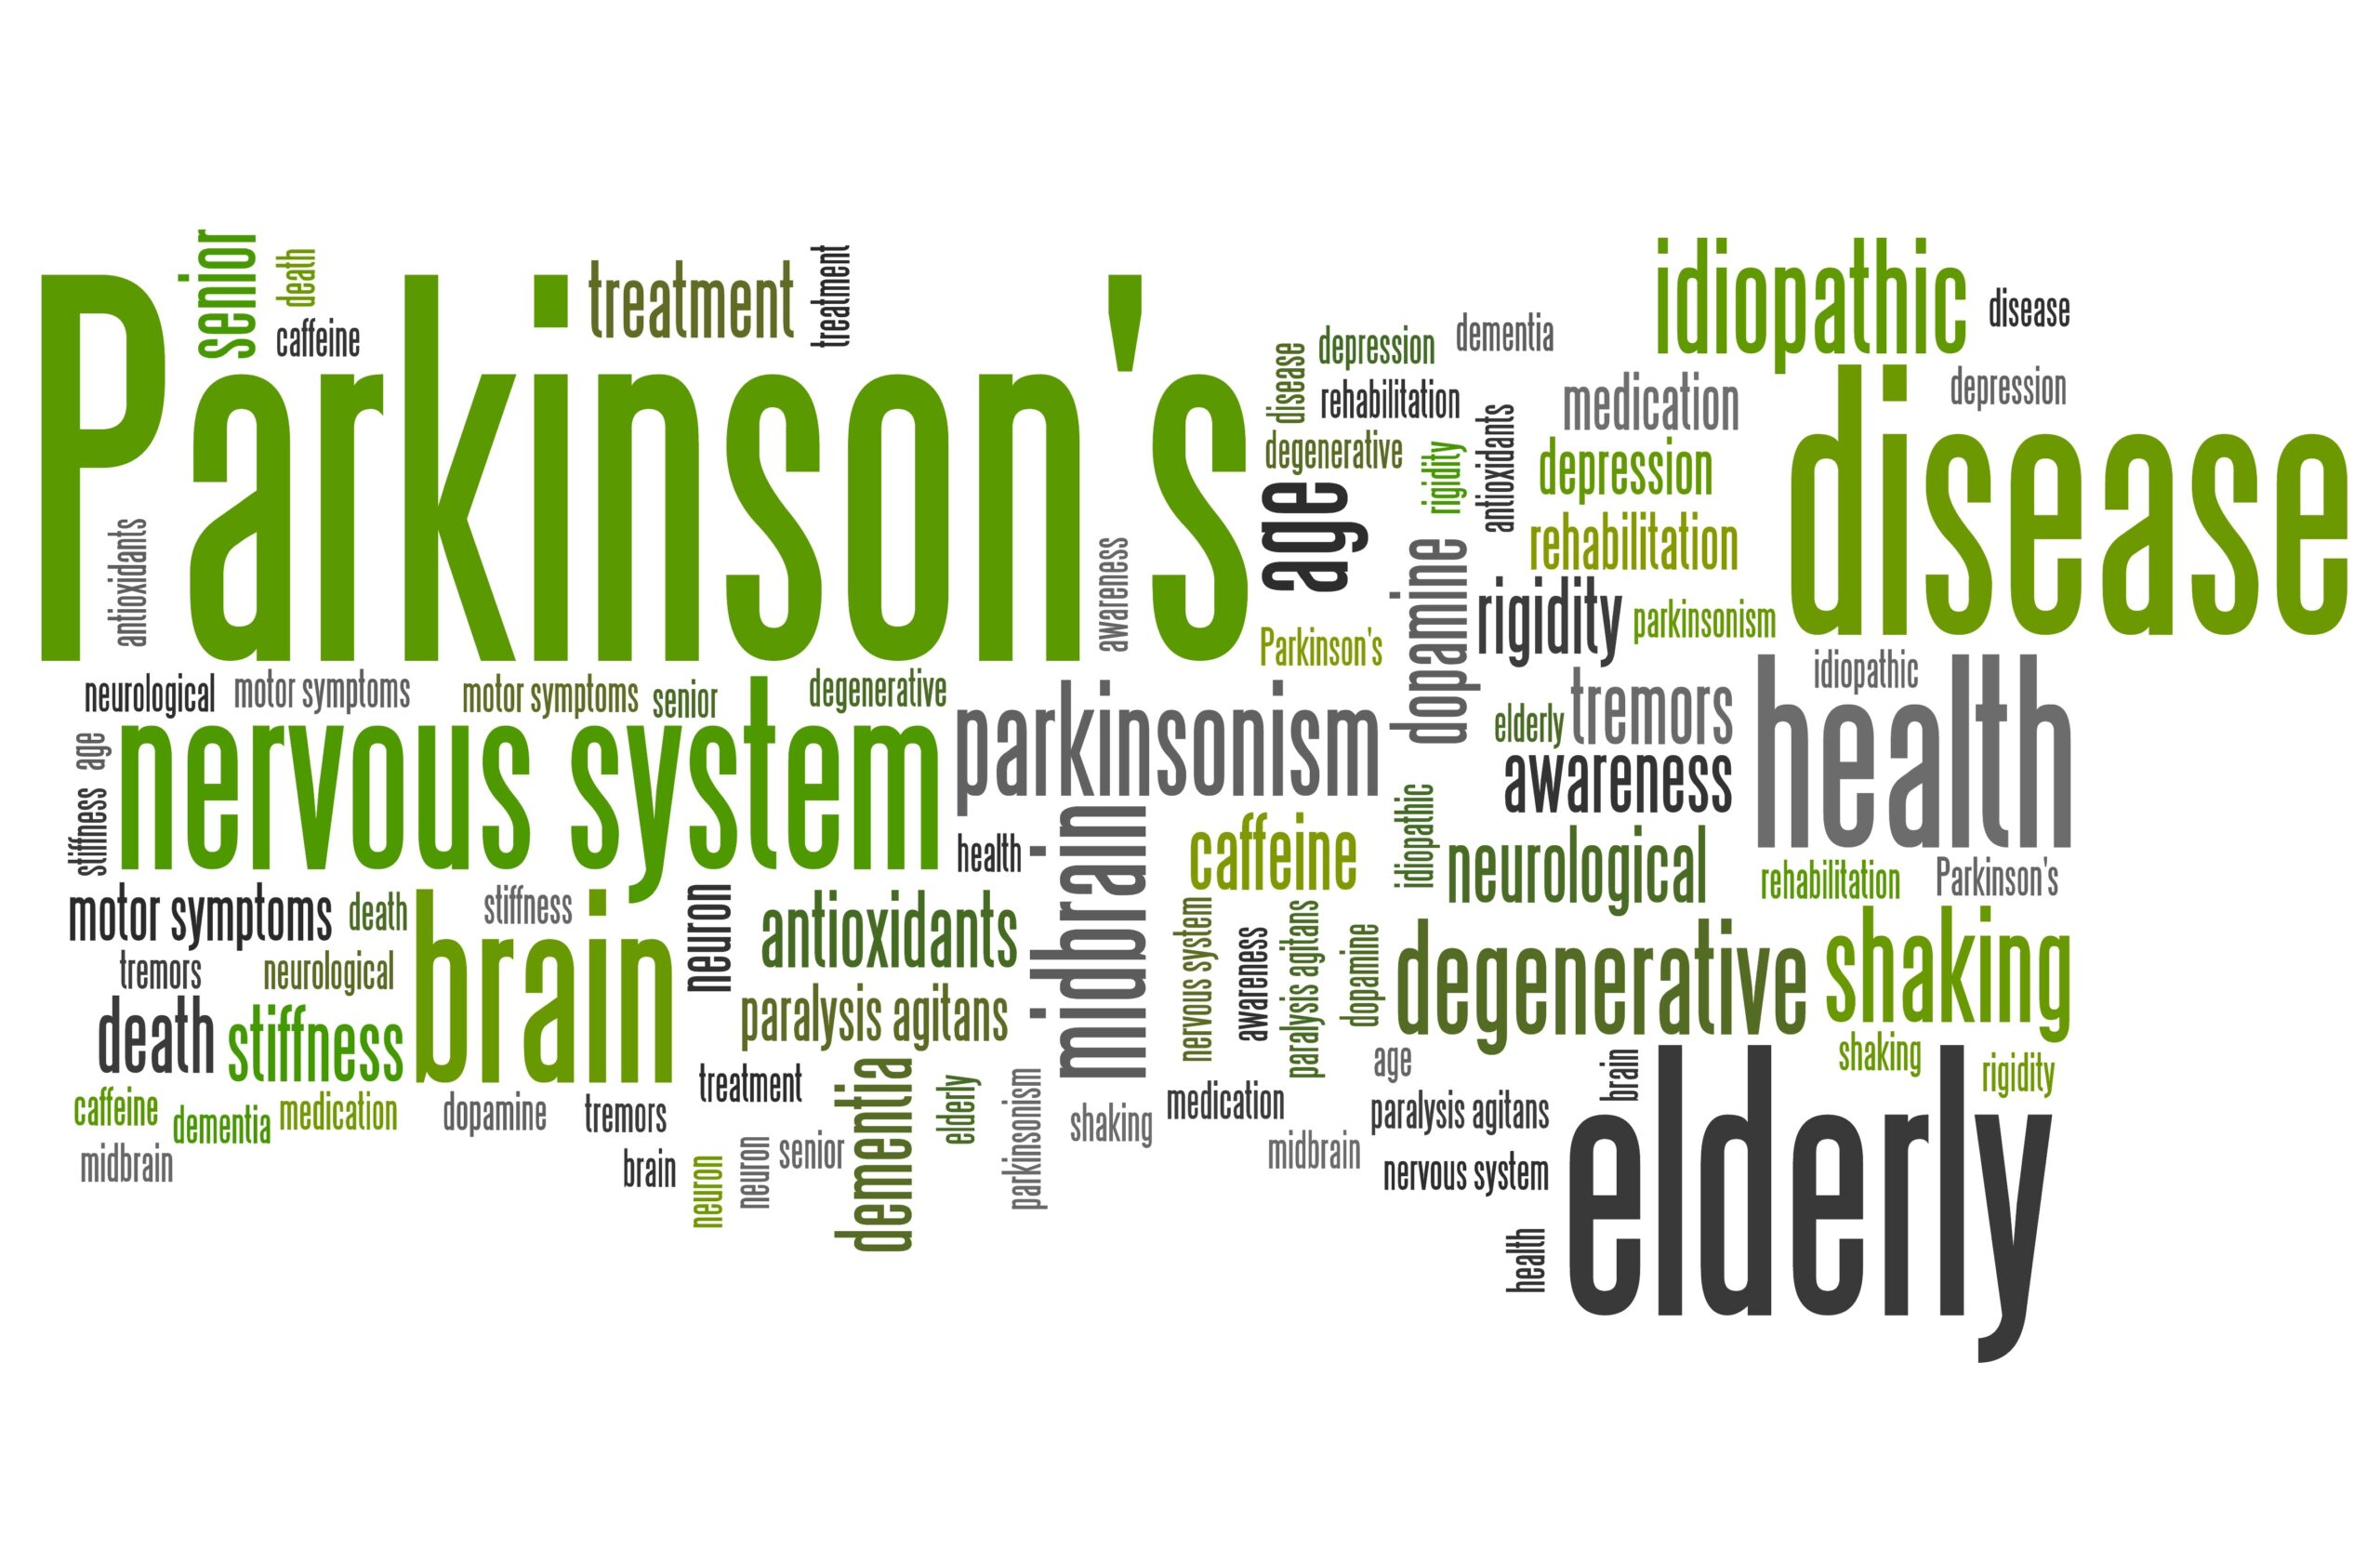 PARKINSON’S DISEASE: HOW LYSOSOMES BECOME A HUB FOR THE PROPAGATION OF THE PATHOLOGY